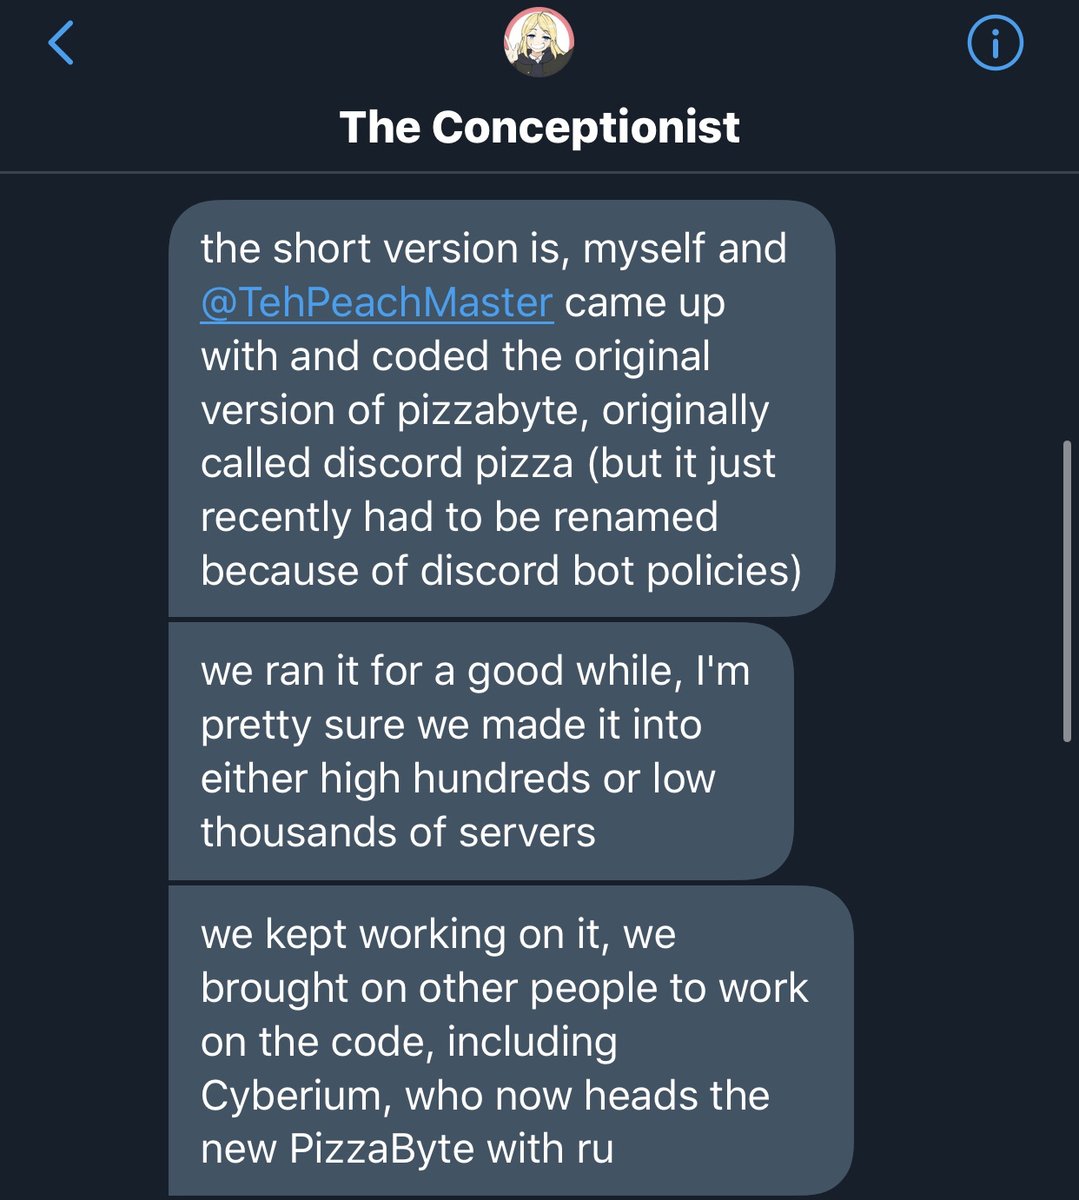 I want to add that the new Pizza Byte creators have admittedly stolen the previous owner's codes (Concept and Peachmaster). Since then they have taken out the credit for them both, and have refused to give them roles and such.